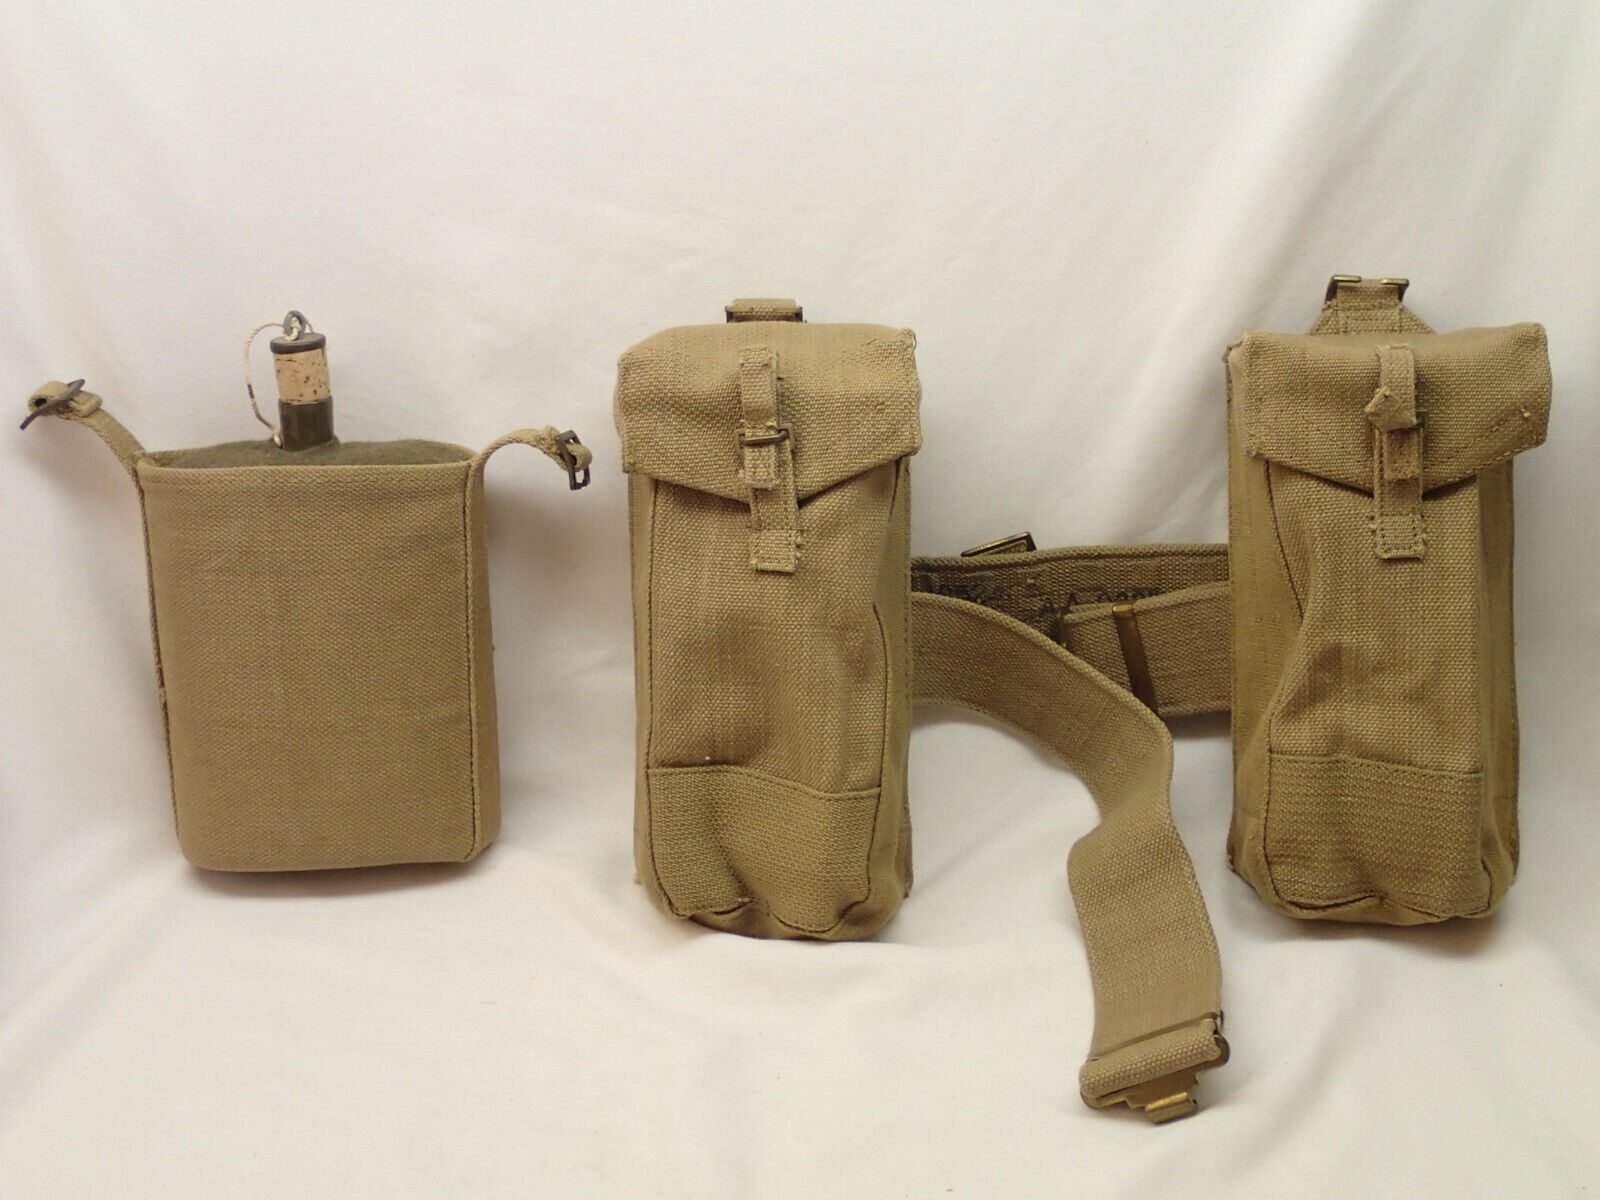 MECo WWII Era Vintage British Canteen 1944 and Belt with 2 Pouches 1952